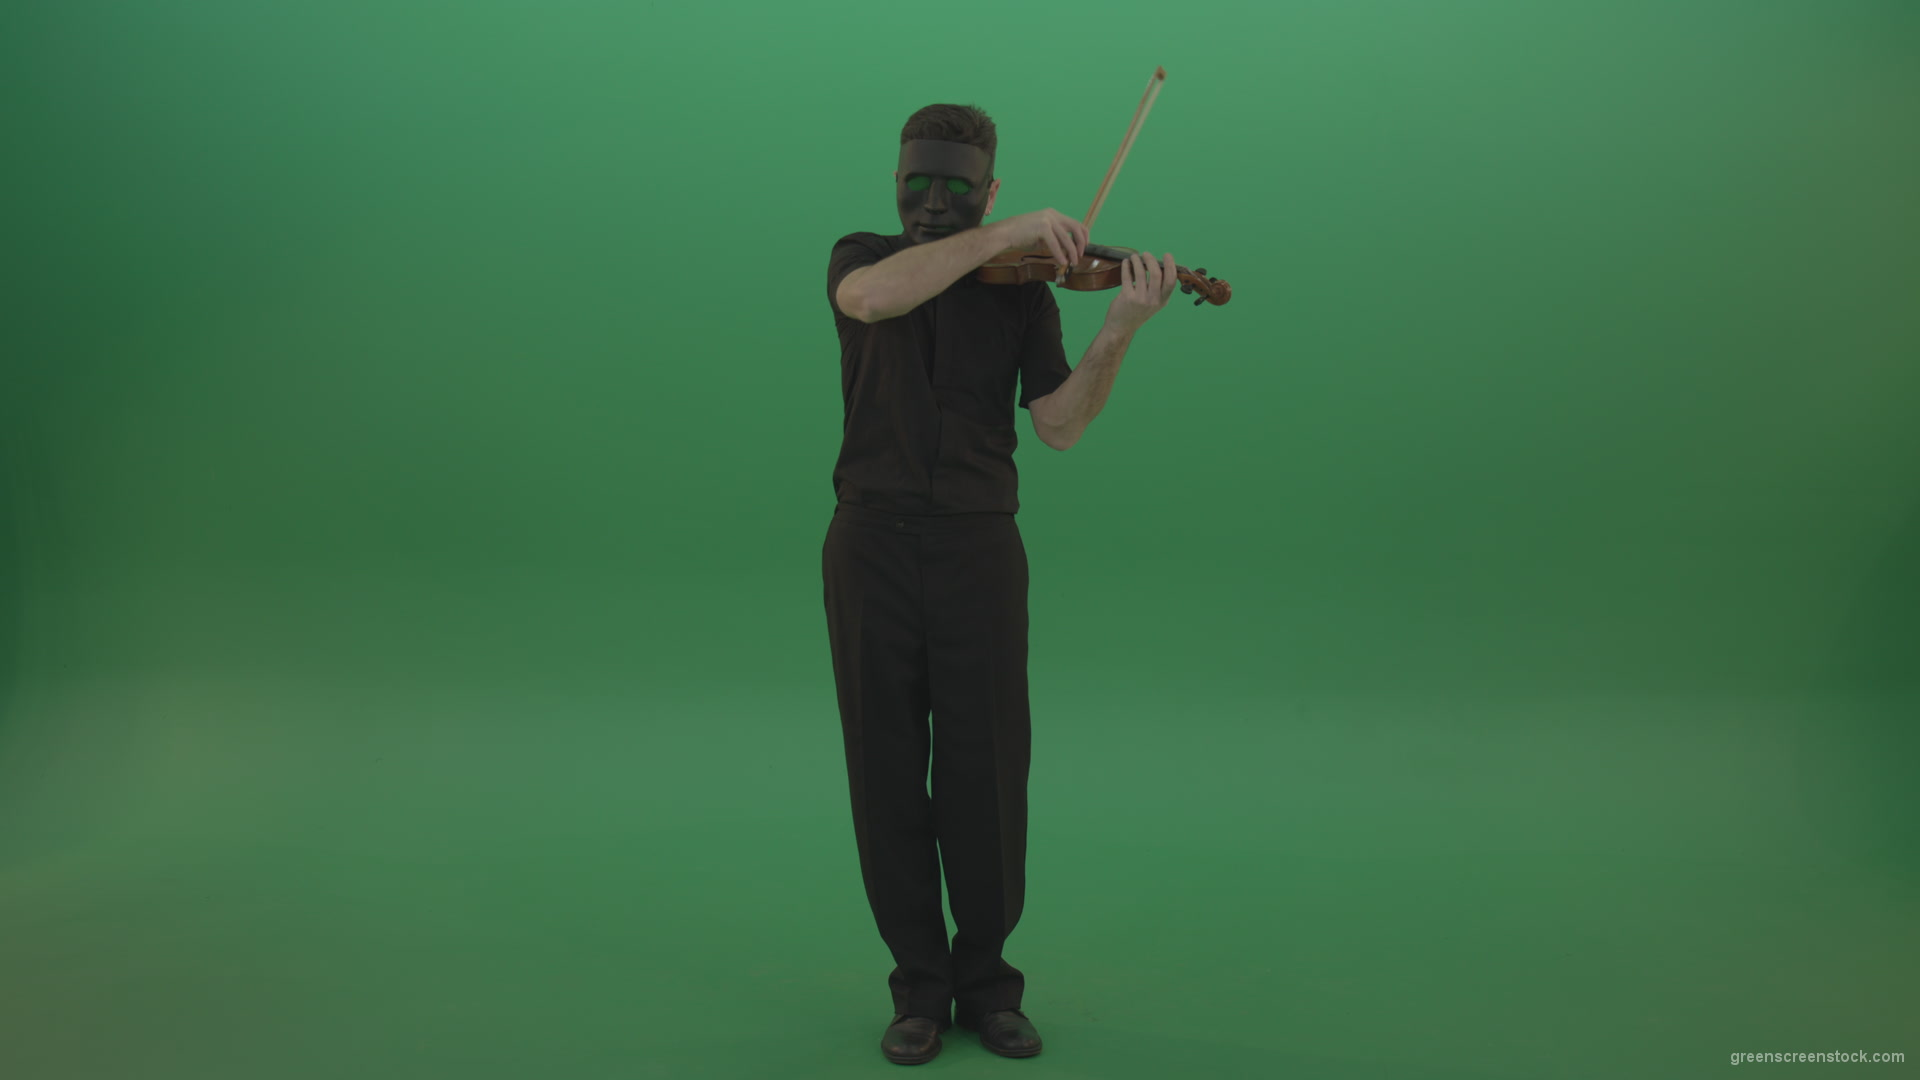 Full-height-Rock-Man-in-black-wear-and-mask-play-violin-fiddle-strings-gothic-dark-music-isolated-on-green-screen_002 Green Screen Stock